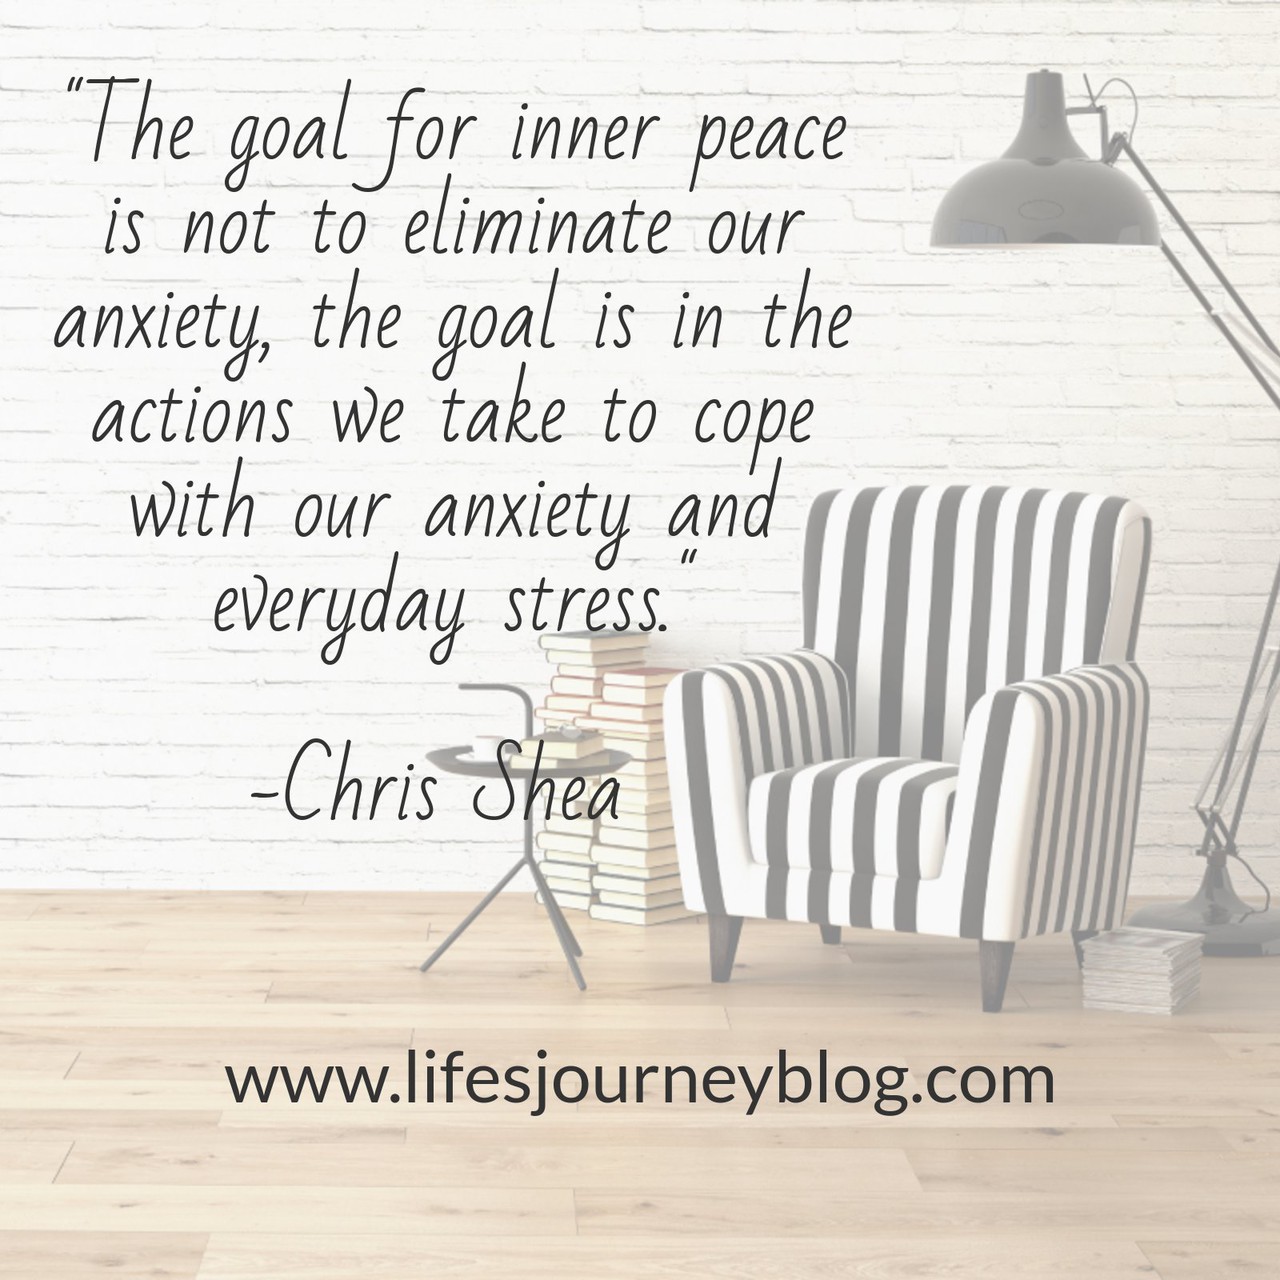 How To Live An Awesome Stress And Anxiety Free Life Without Worry -  Lifesjourney Blog